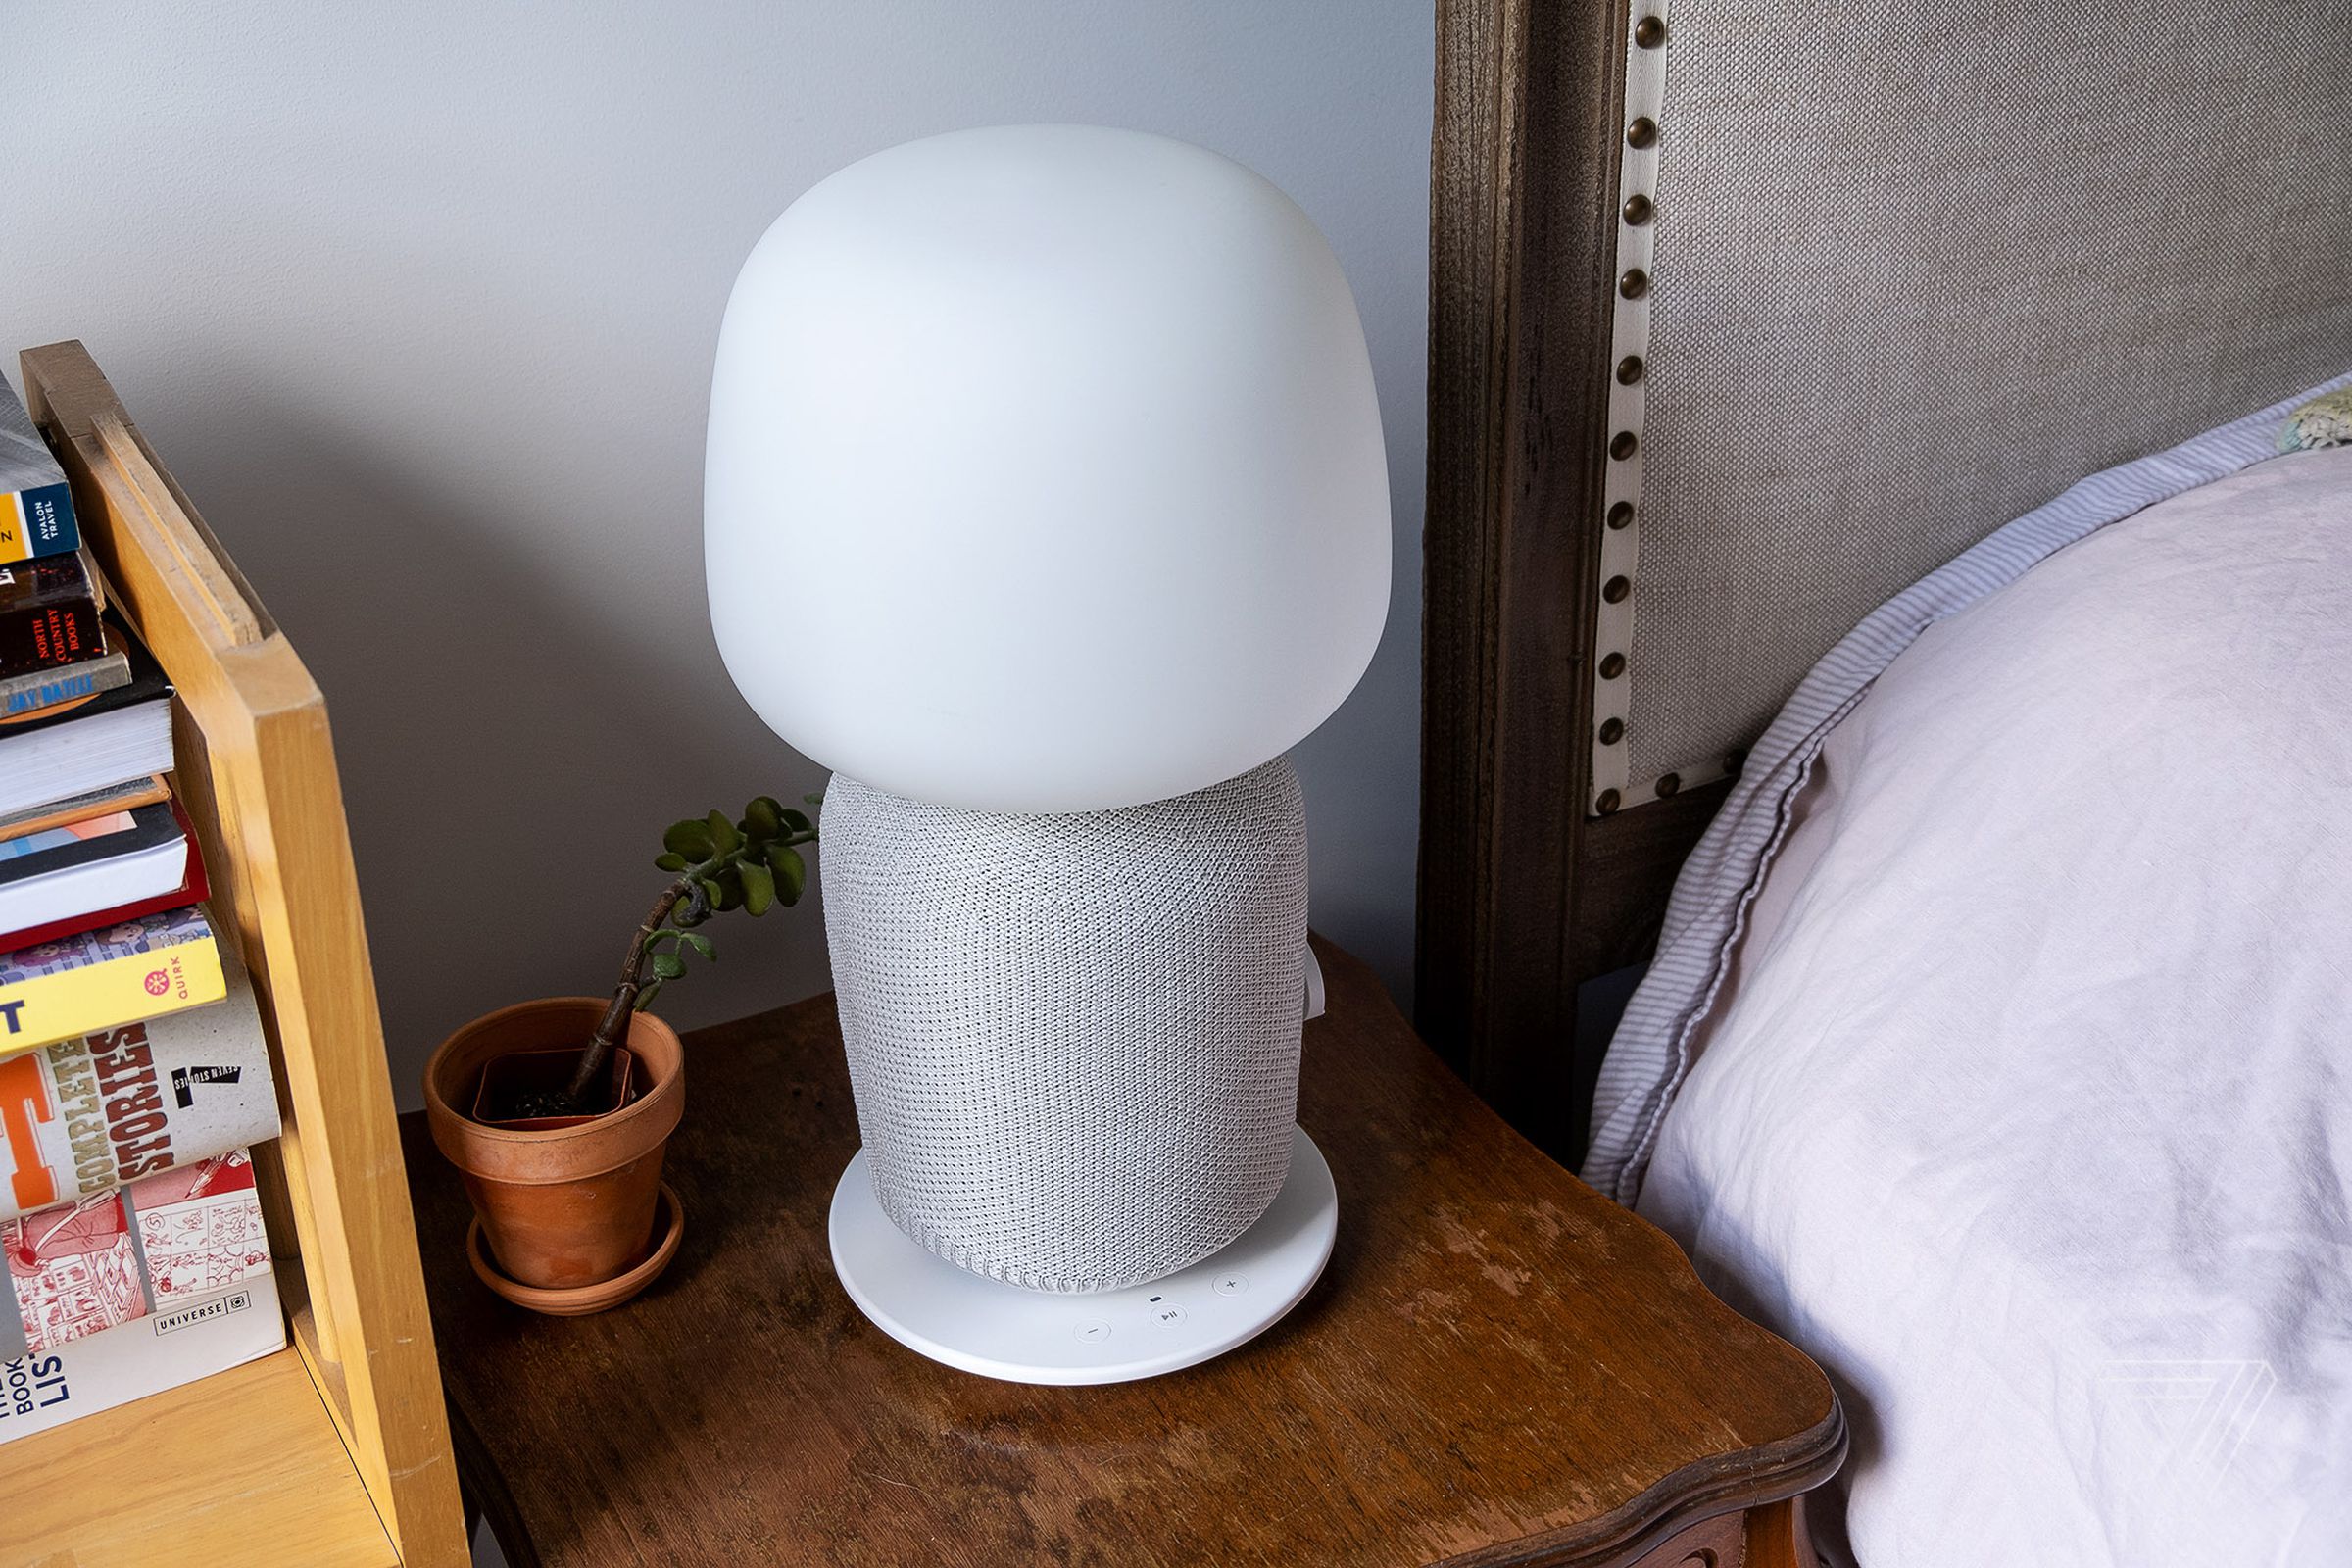 Ikea and Sonos are also preparing an updated table lamp speaker.